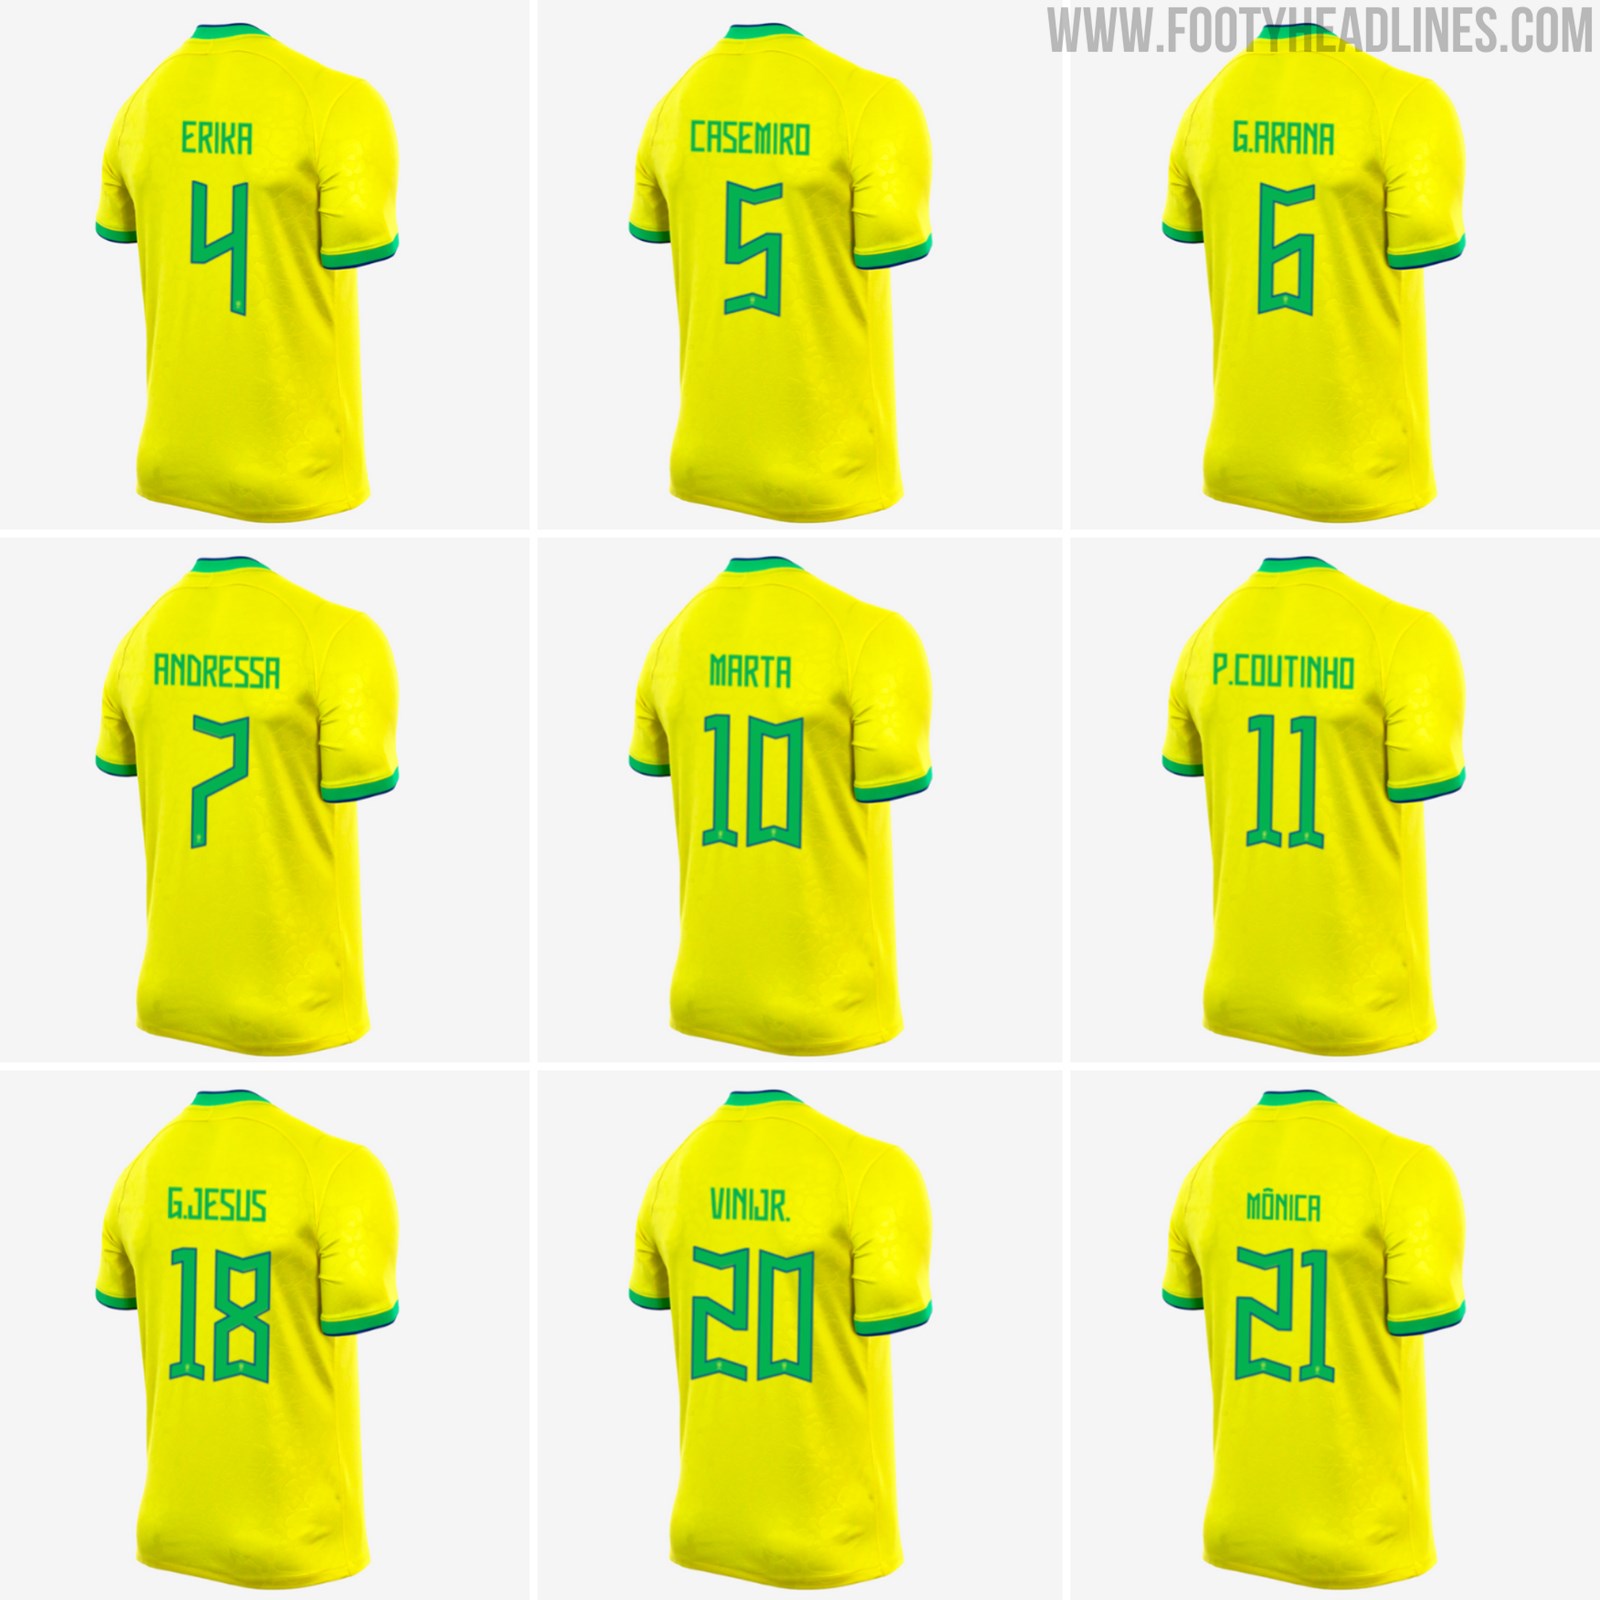 brazil national team jersey numbers